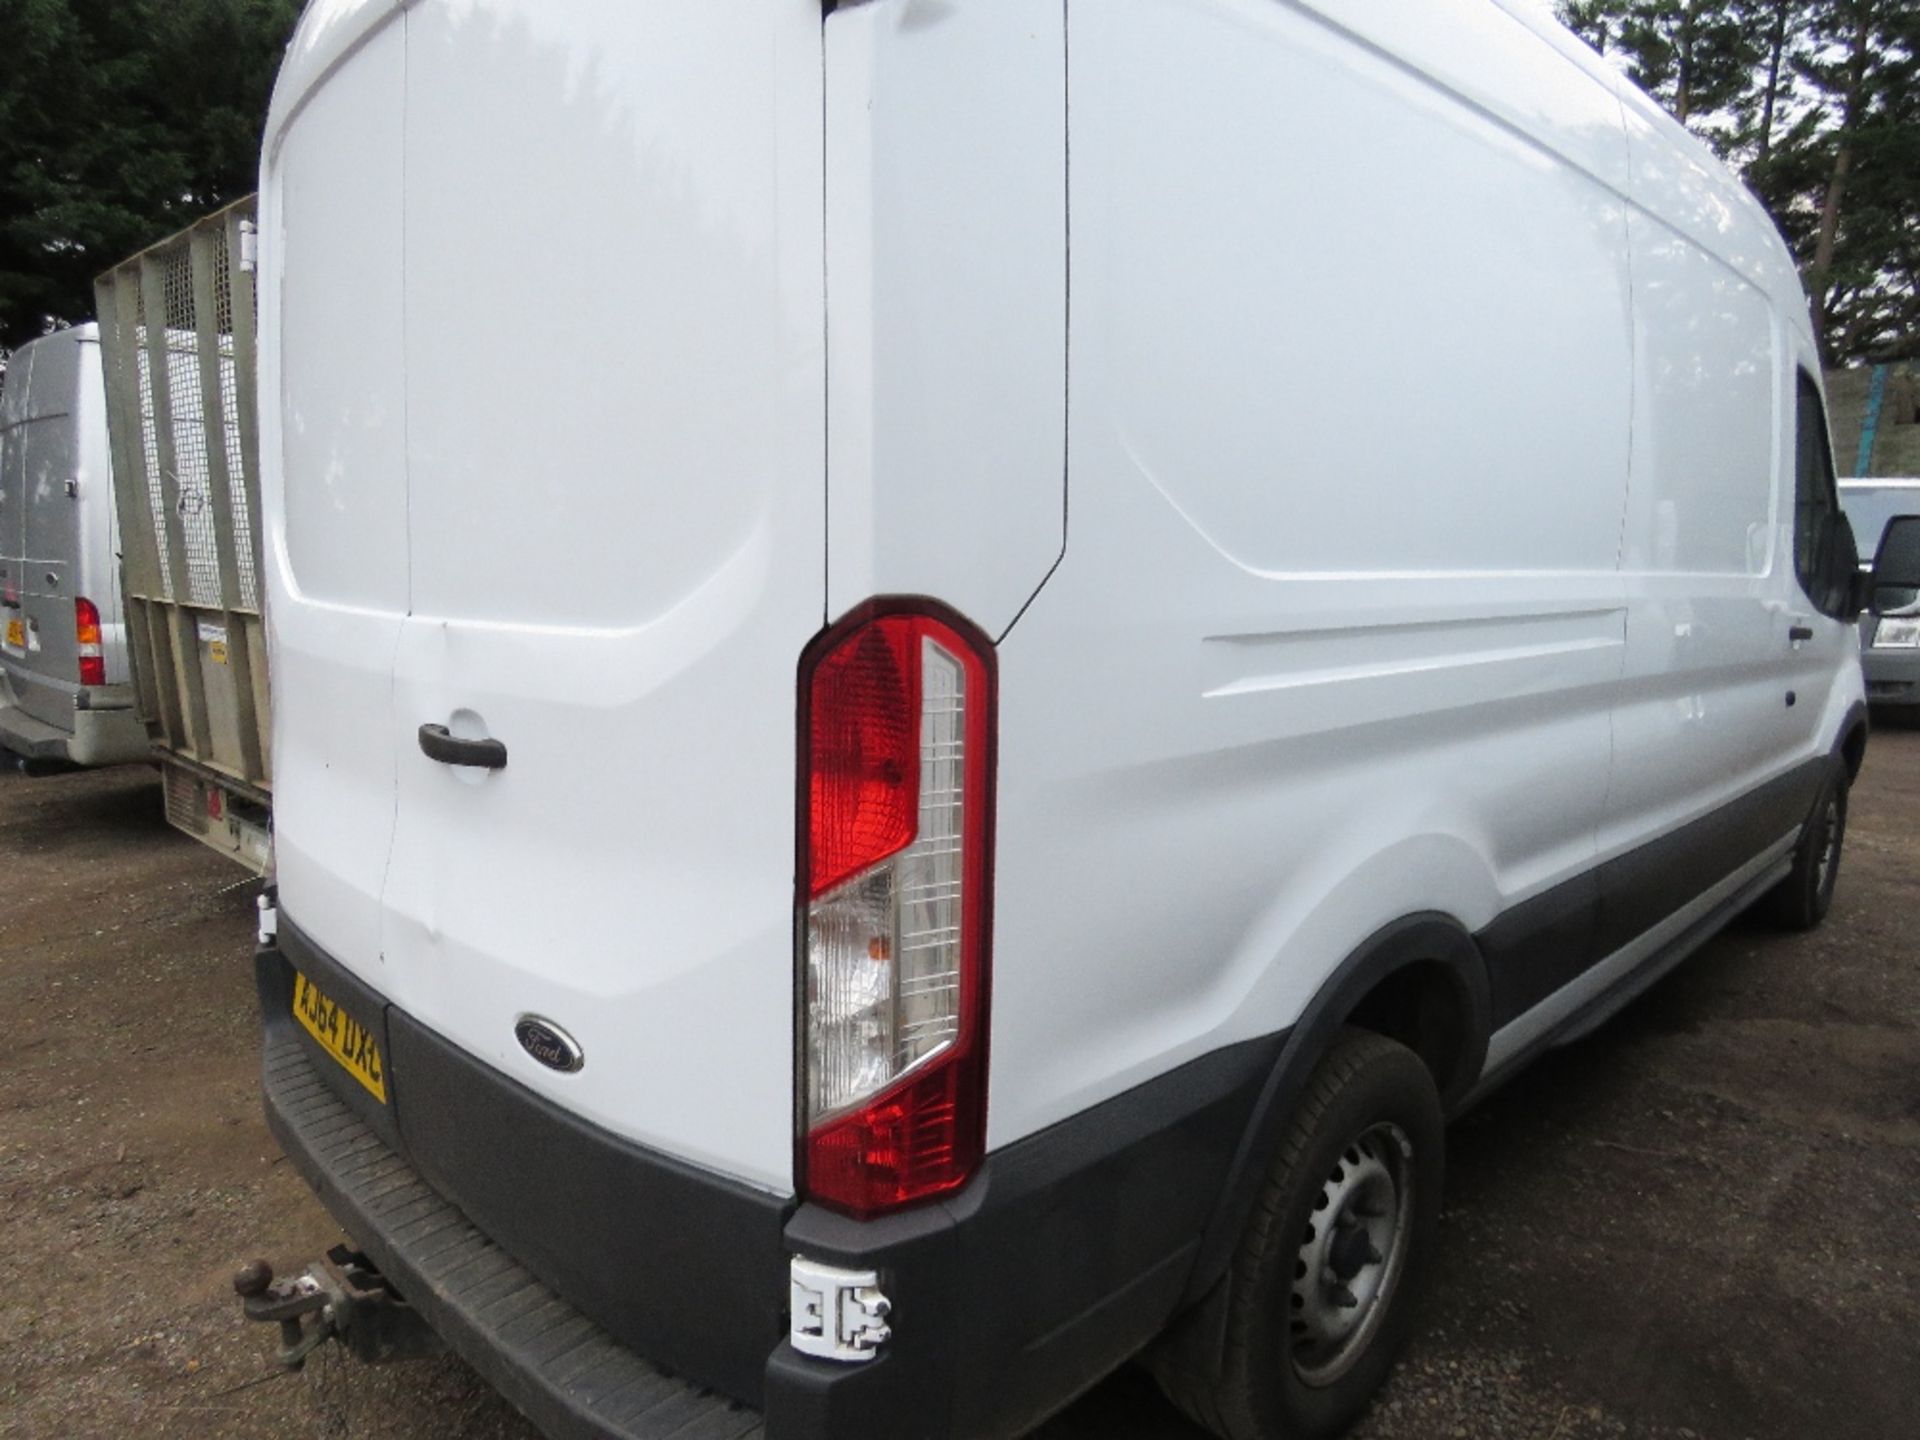 FORD TRANSIT 350 HIGH TOP LONG WHEEL BASE PANEL VAN REG:AJ64 DXC.EURO 5 EMMISSIONS. WITH V5. ONE OWN - Image 5 of 18